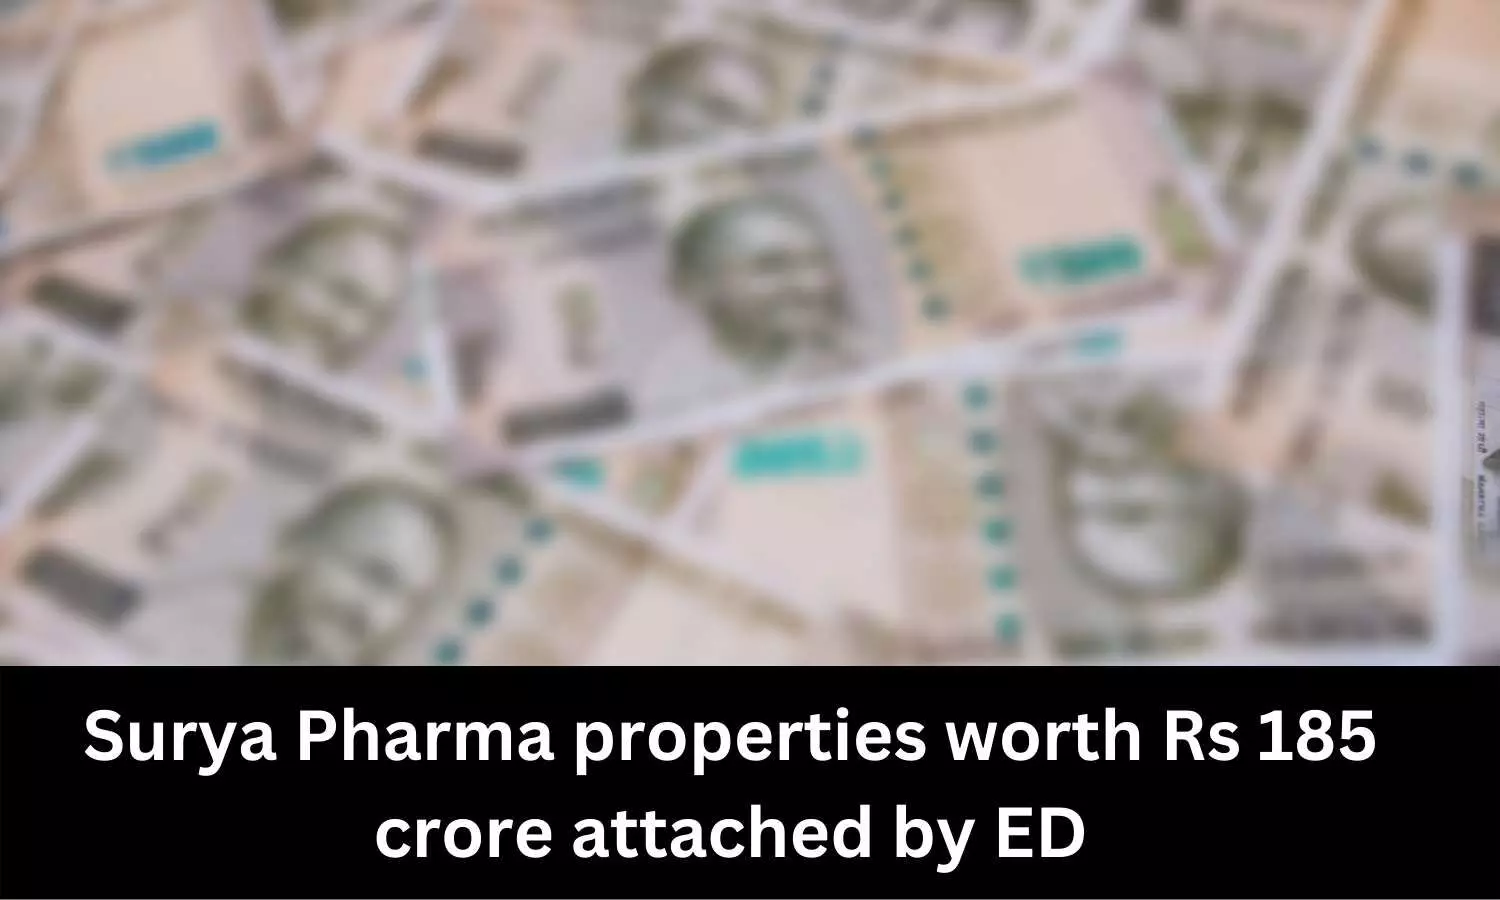 Surya Pharma properties worth Rs 185 crore attached by ED